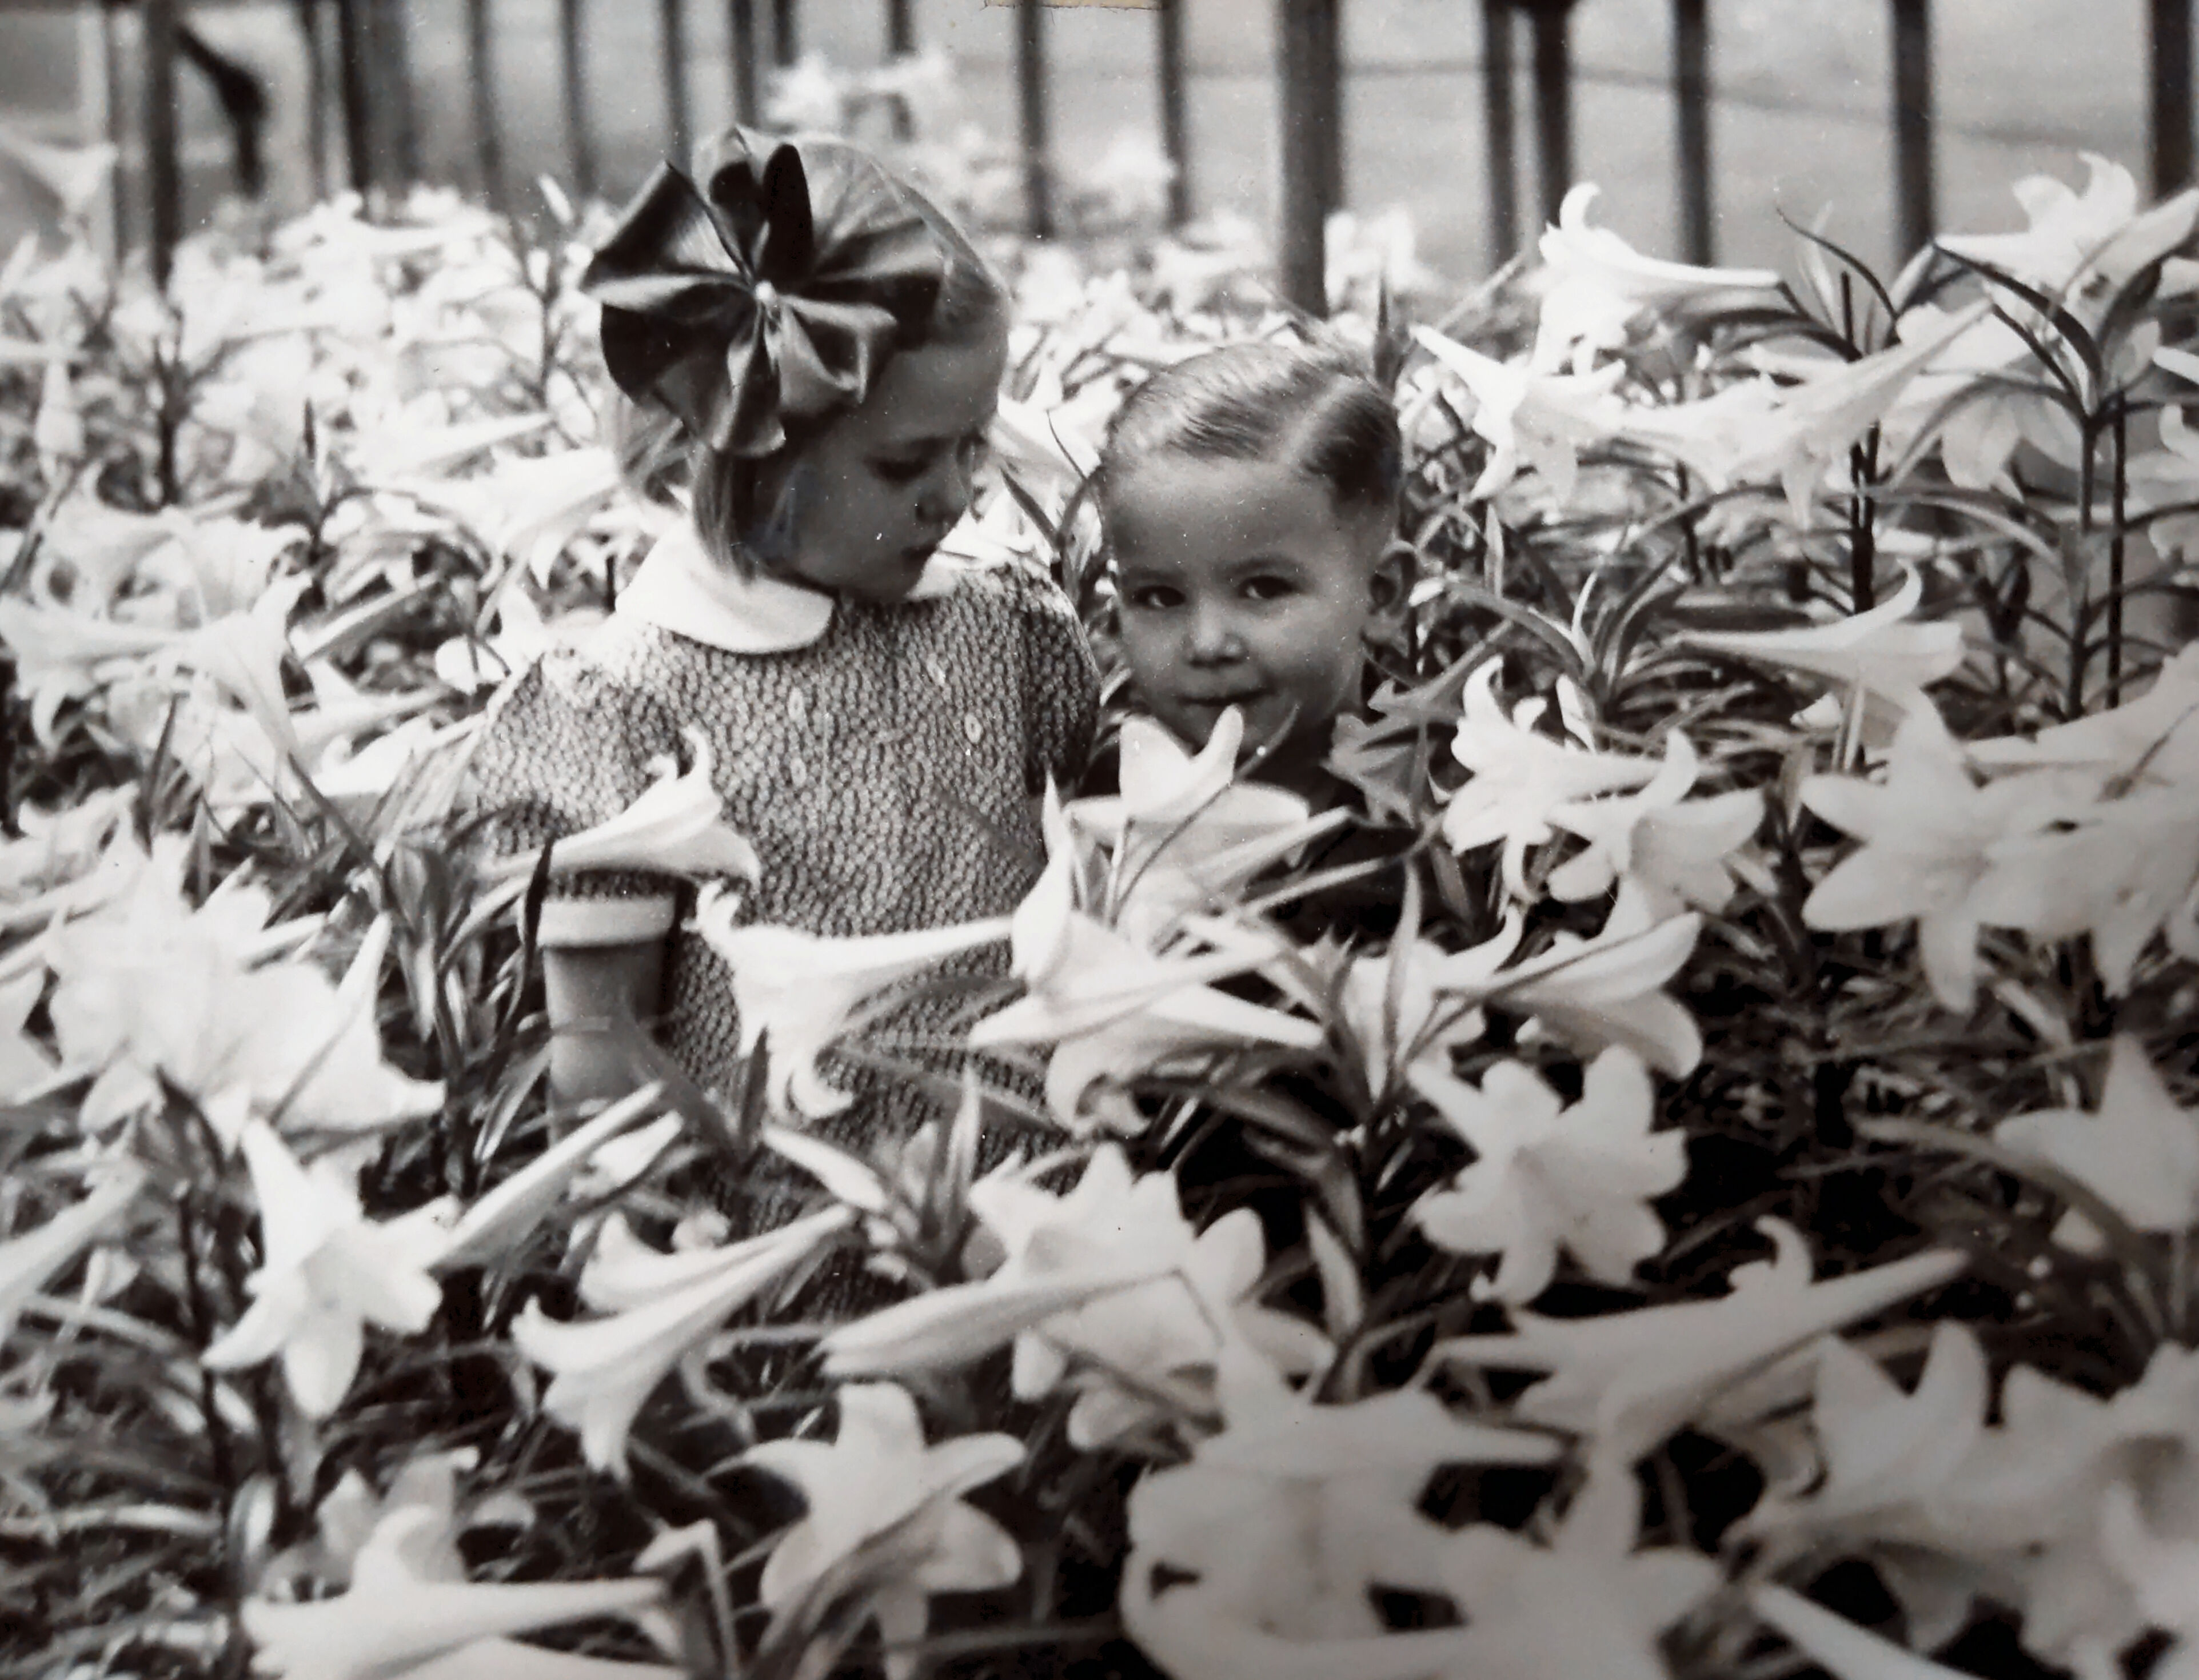 Inside the Grandpa Blaine Davis Greenhouse full of Easter Lilies, 1937. Phil is 3 and Caroline is 6.